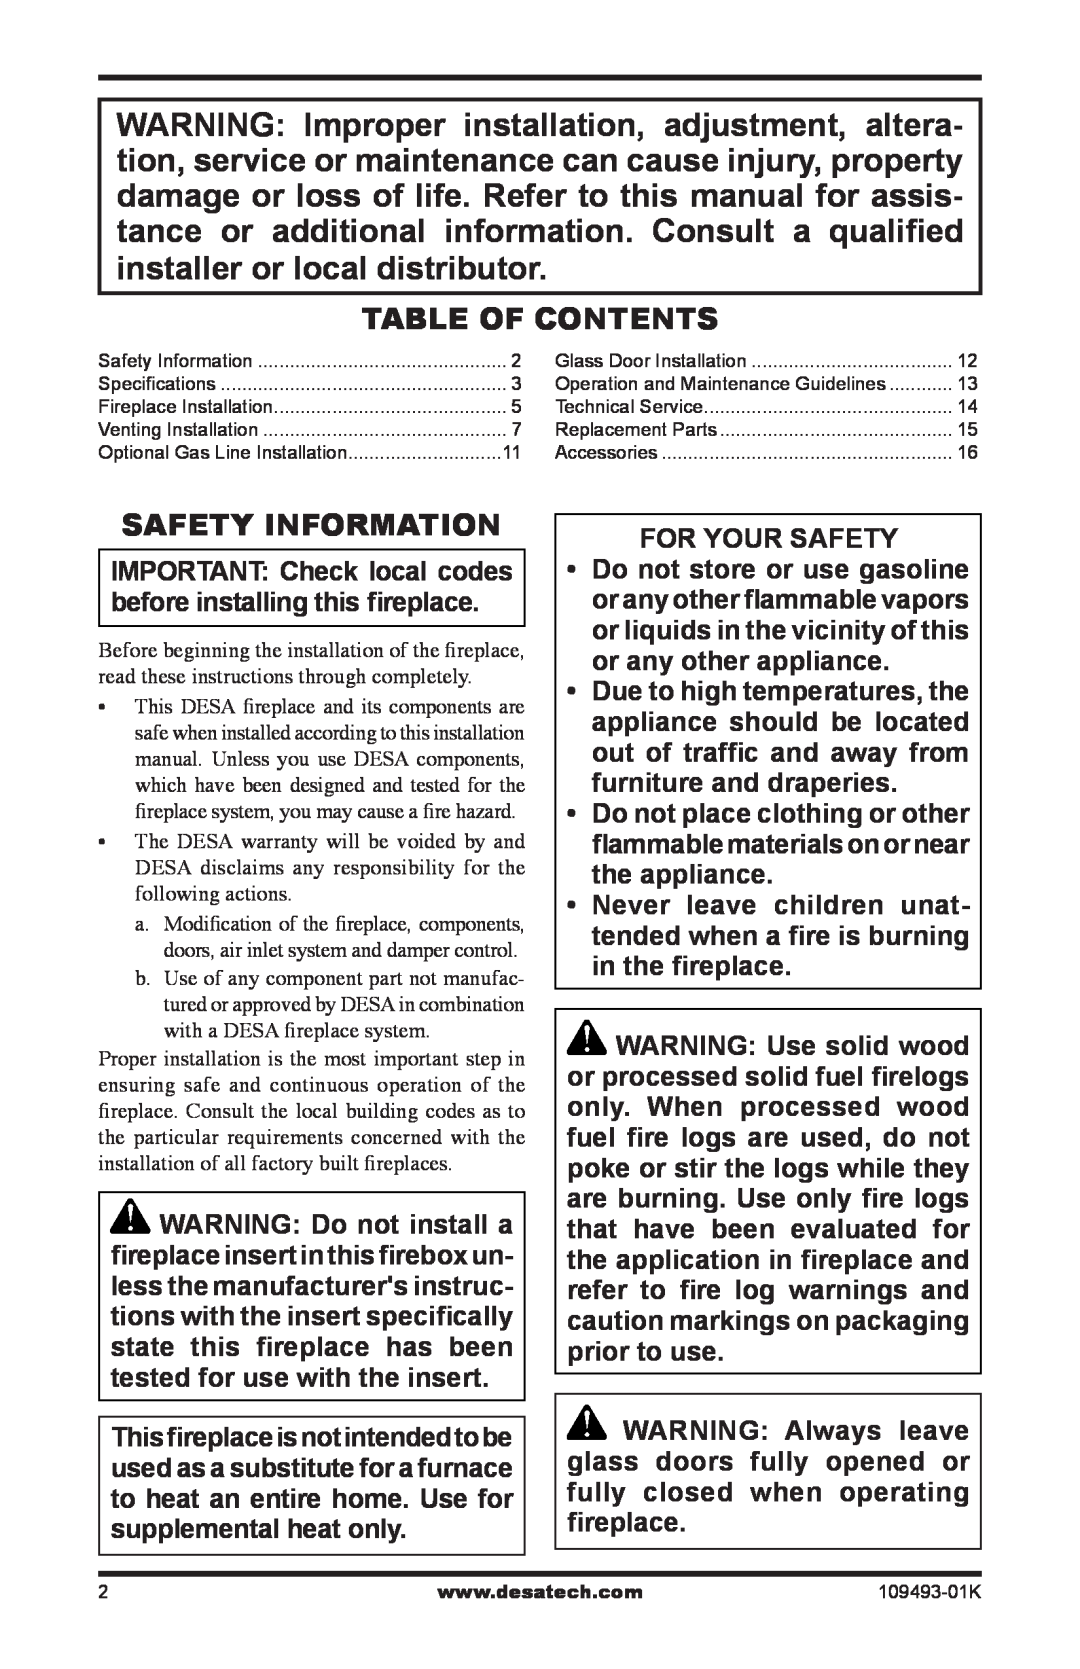 Desa ICBO# 3507 installation manual Table of Contents, Safety Information, For Your Safety 